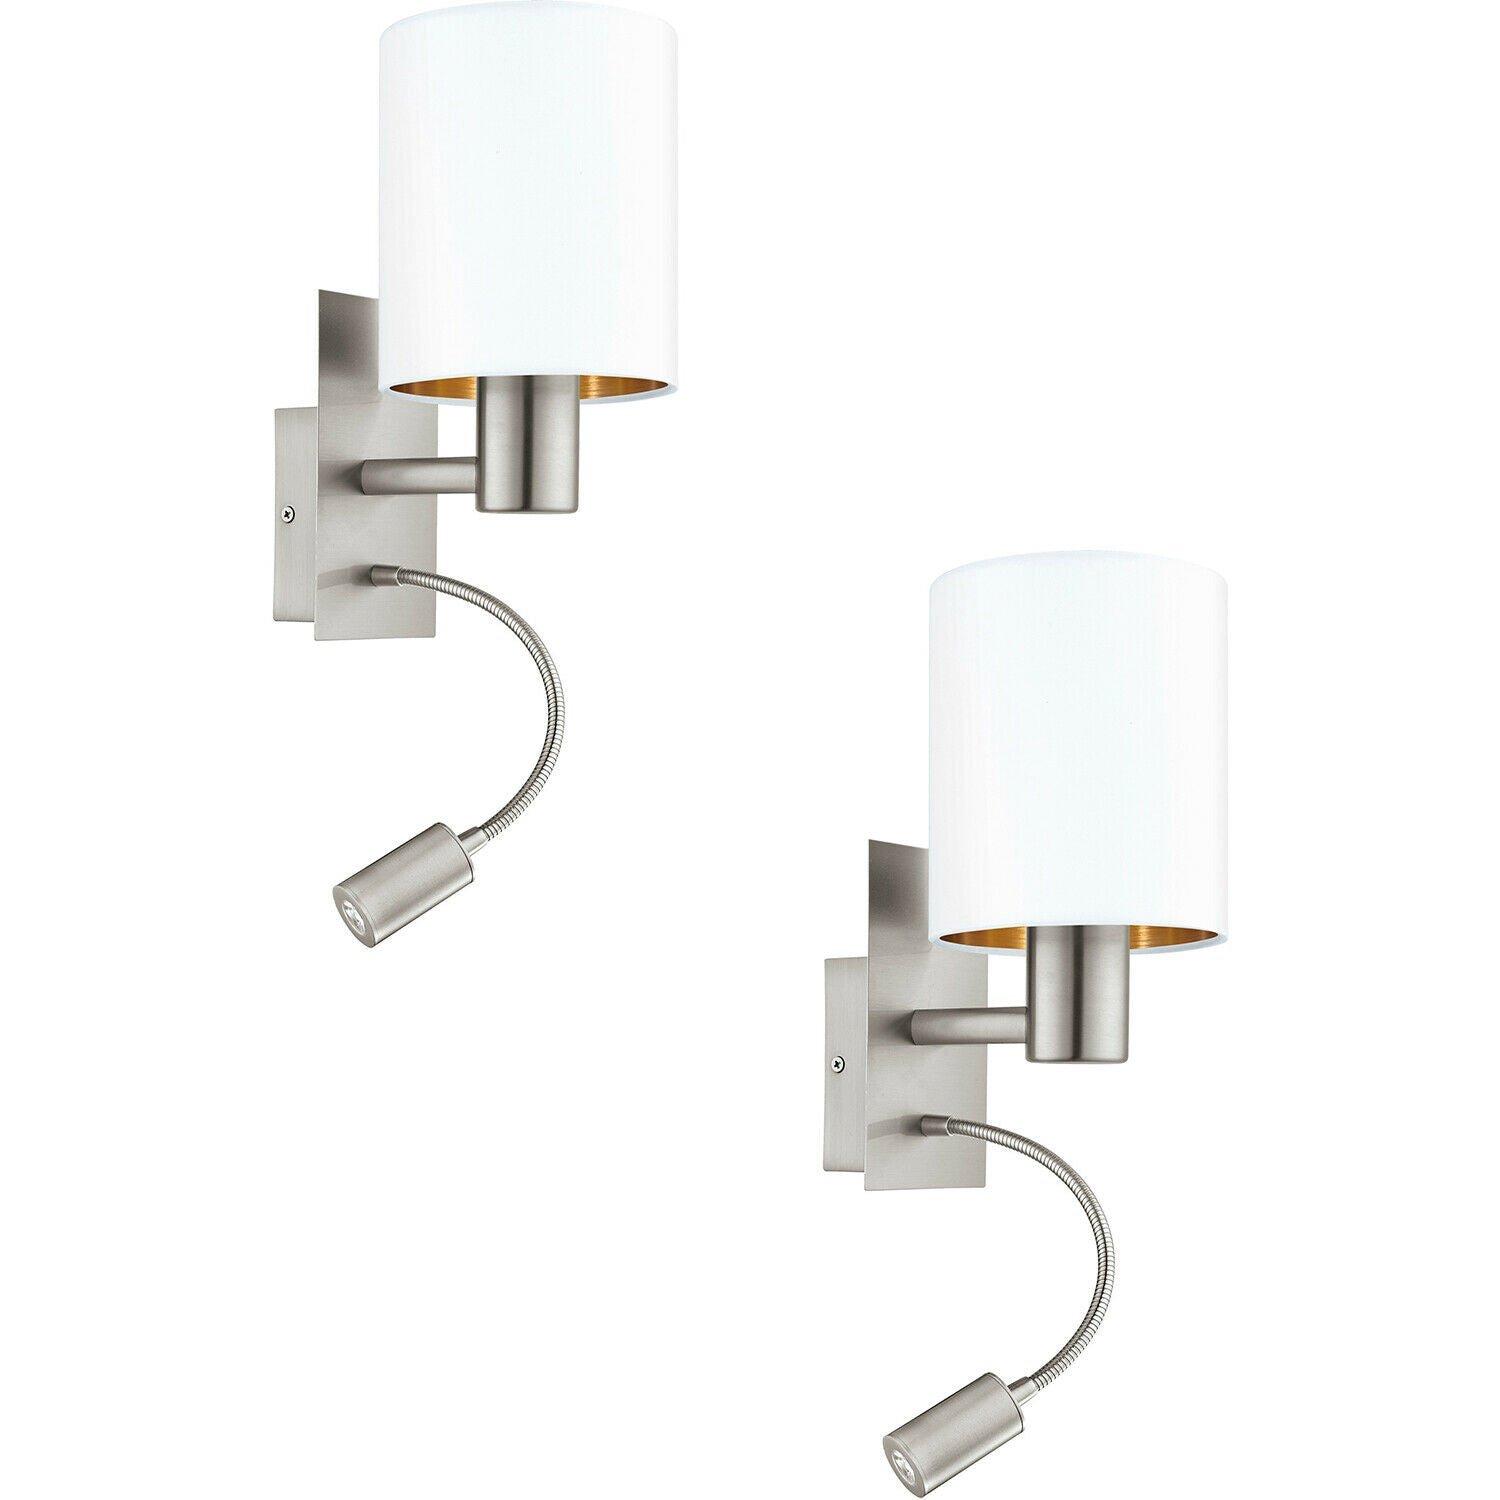 2 PACK Wall Light Satin Nickel Shade White Copper Fabric E27 LED 1x40W 1x3.5W